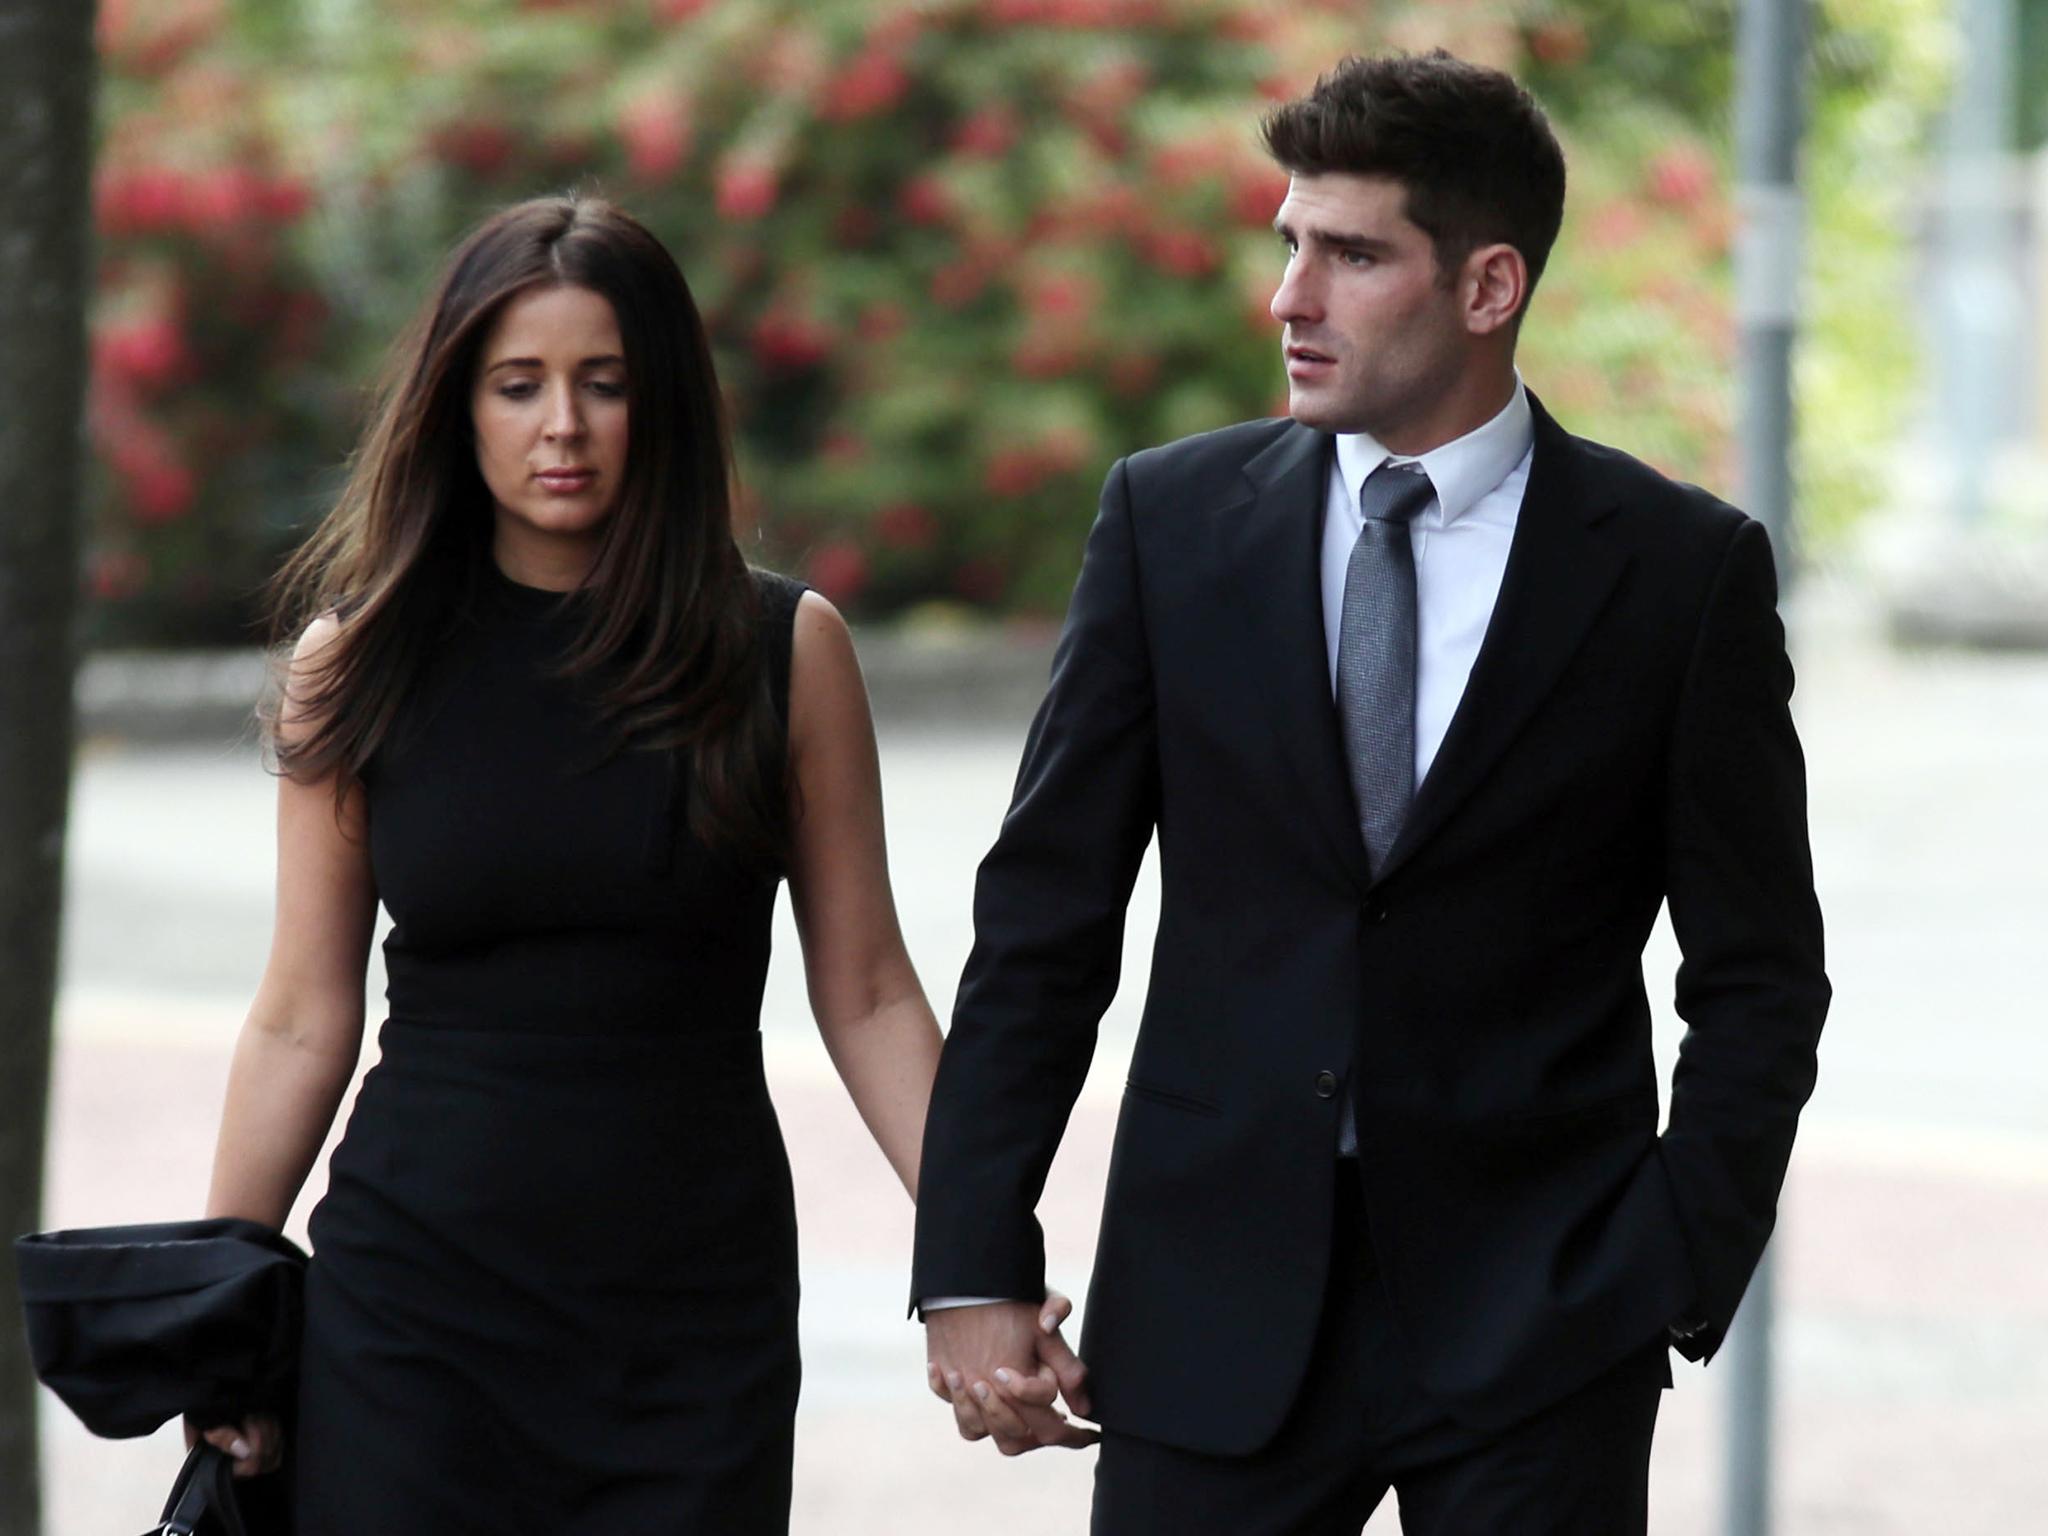 Footballer Ched Evans with partner Natasha Massey on their way into Cardiff Crown Court